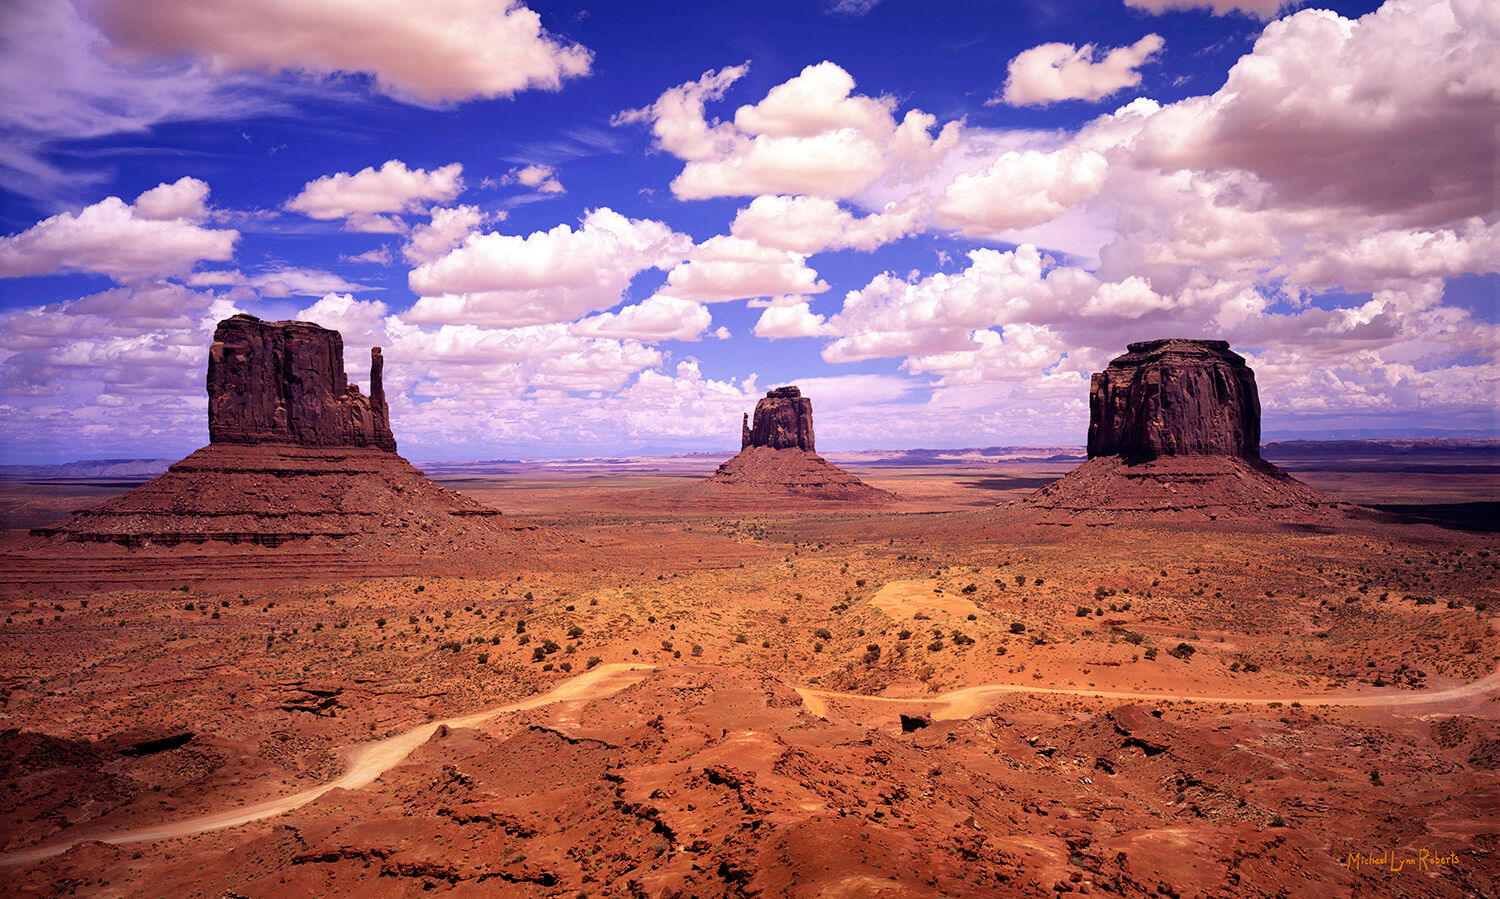 To me, this is the classic view of Monument Valley from the rim overlook. All three of the closest buttes are grouped together...